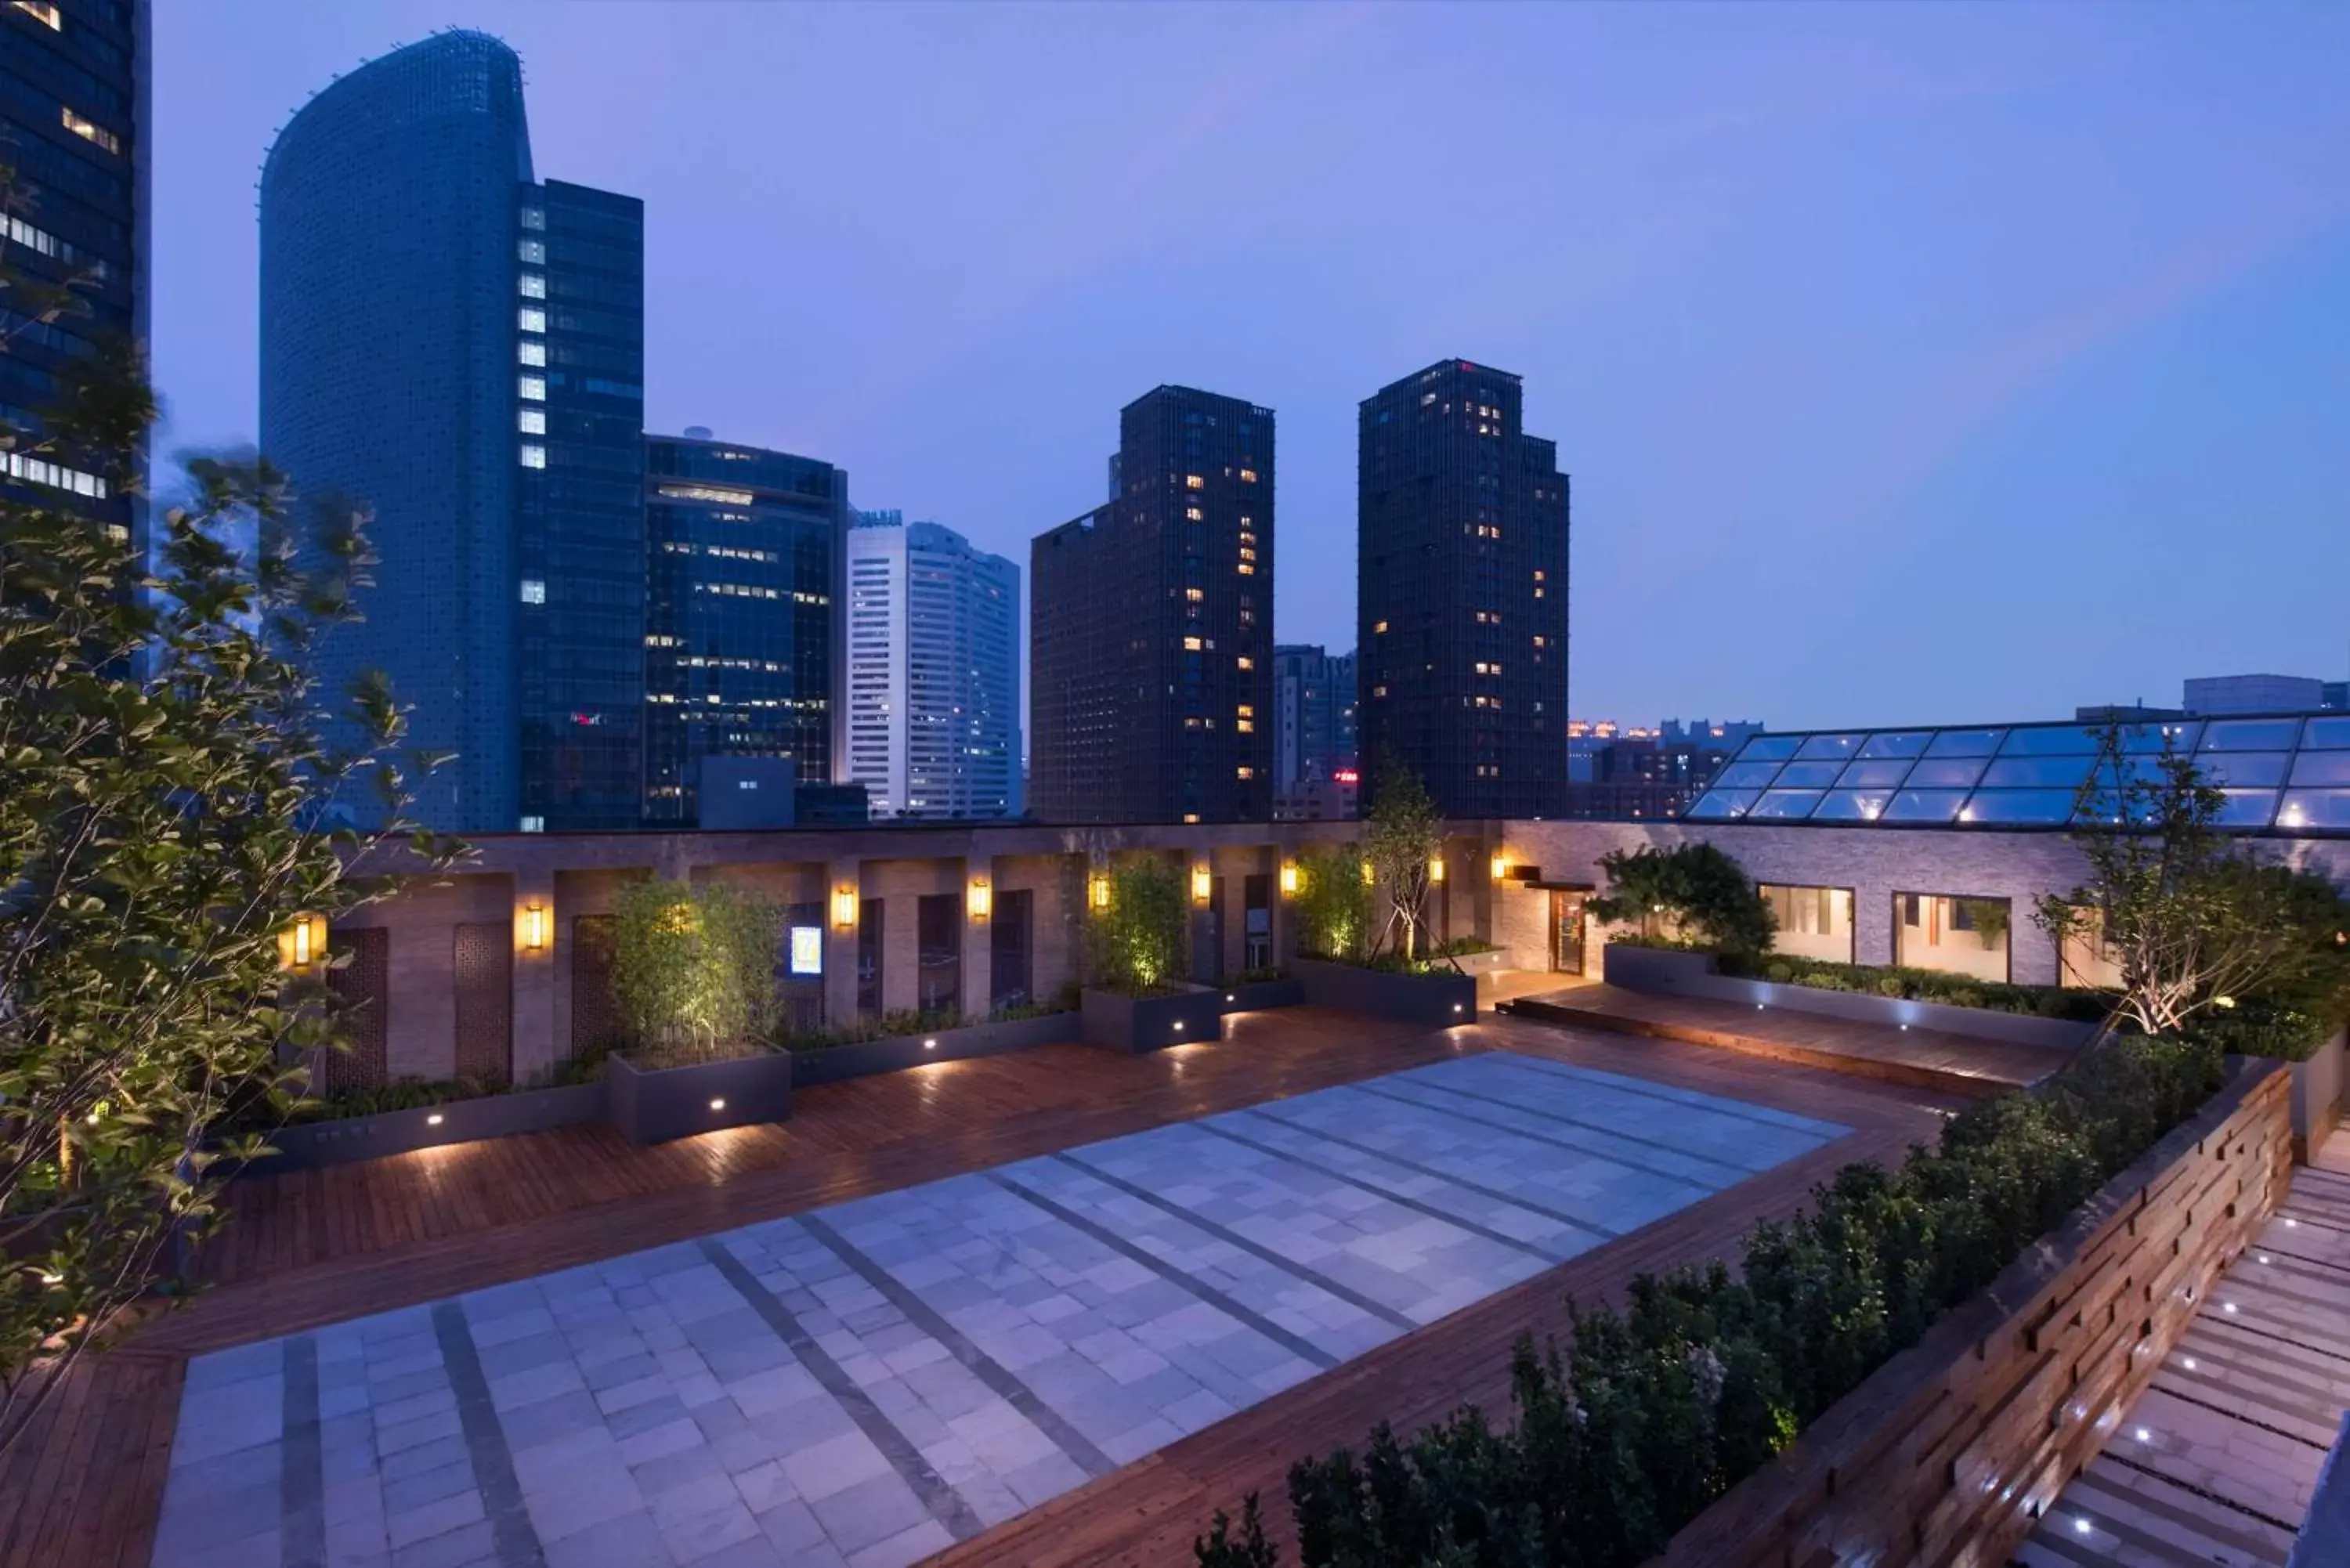 Property building, Swimming Pool in Hilton Beijing Hotel